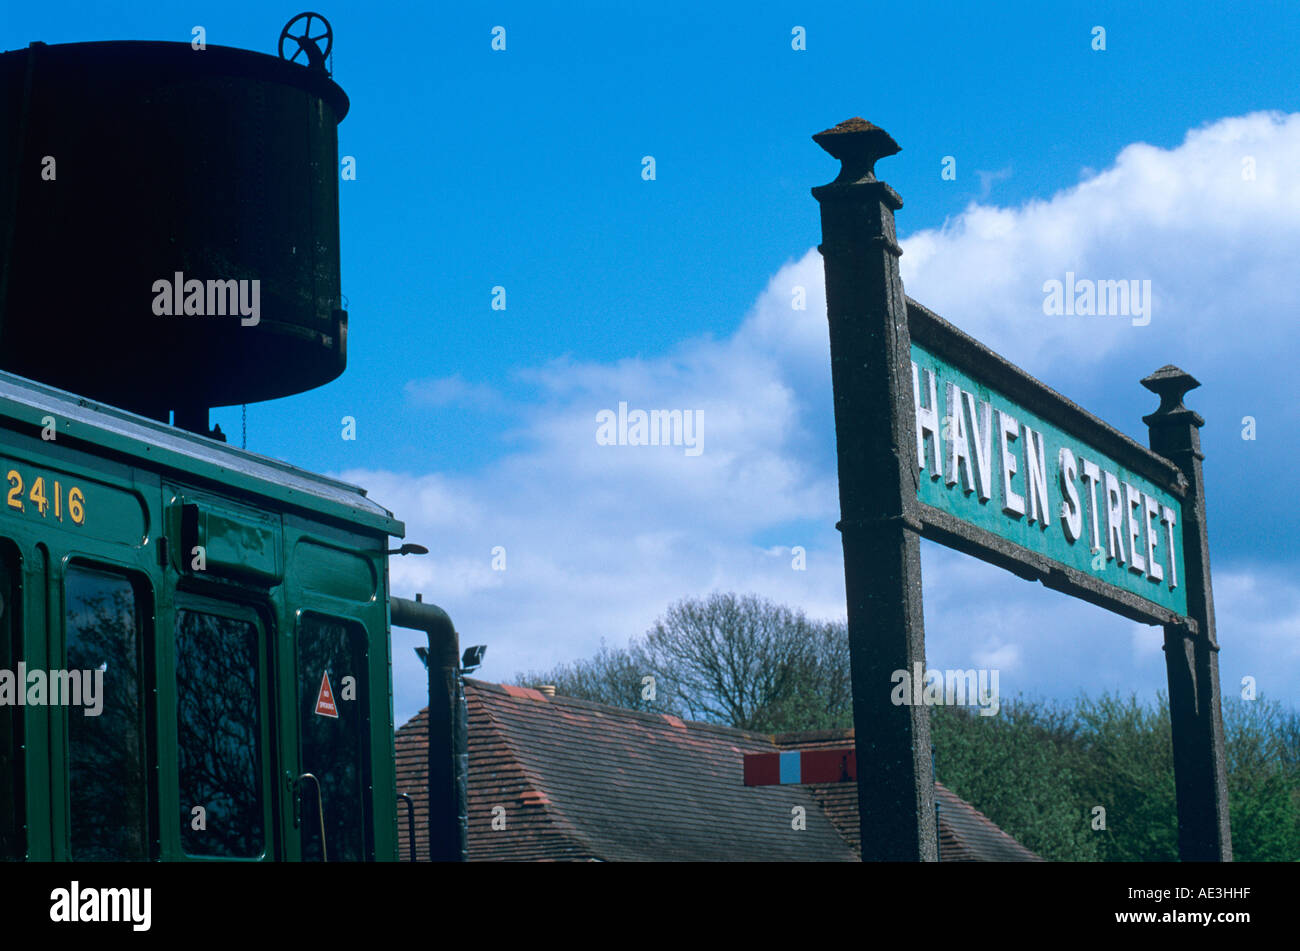 old fashioned type of southern railway platform sign at havenstreet isle of wight Stock Photo